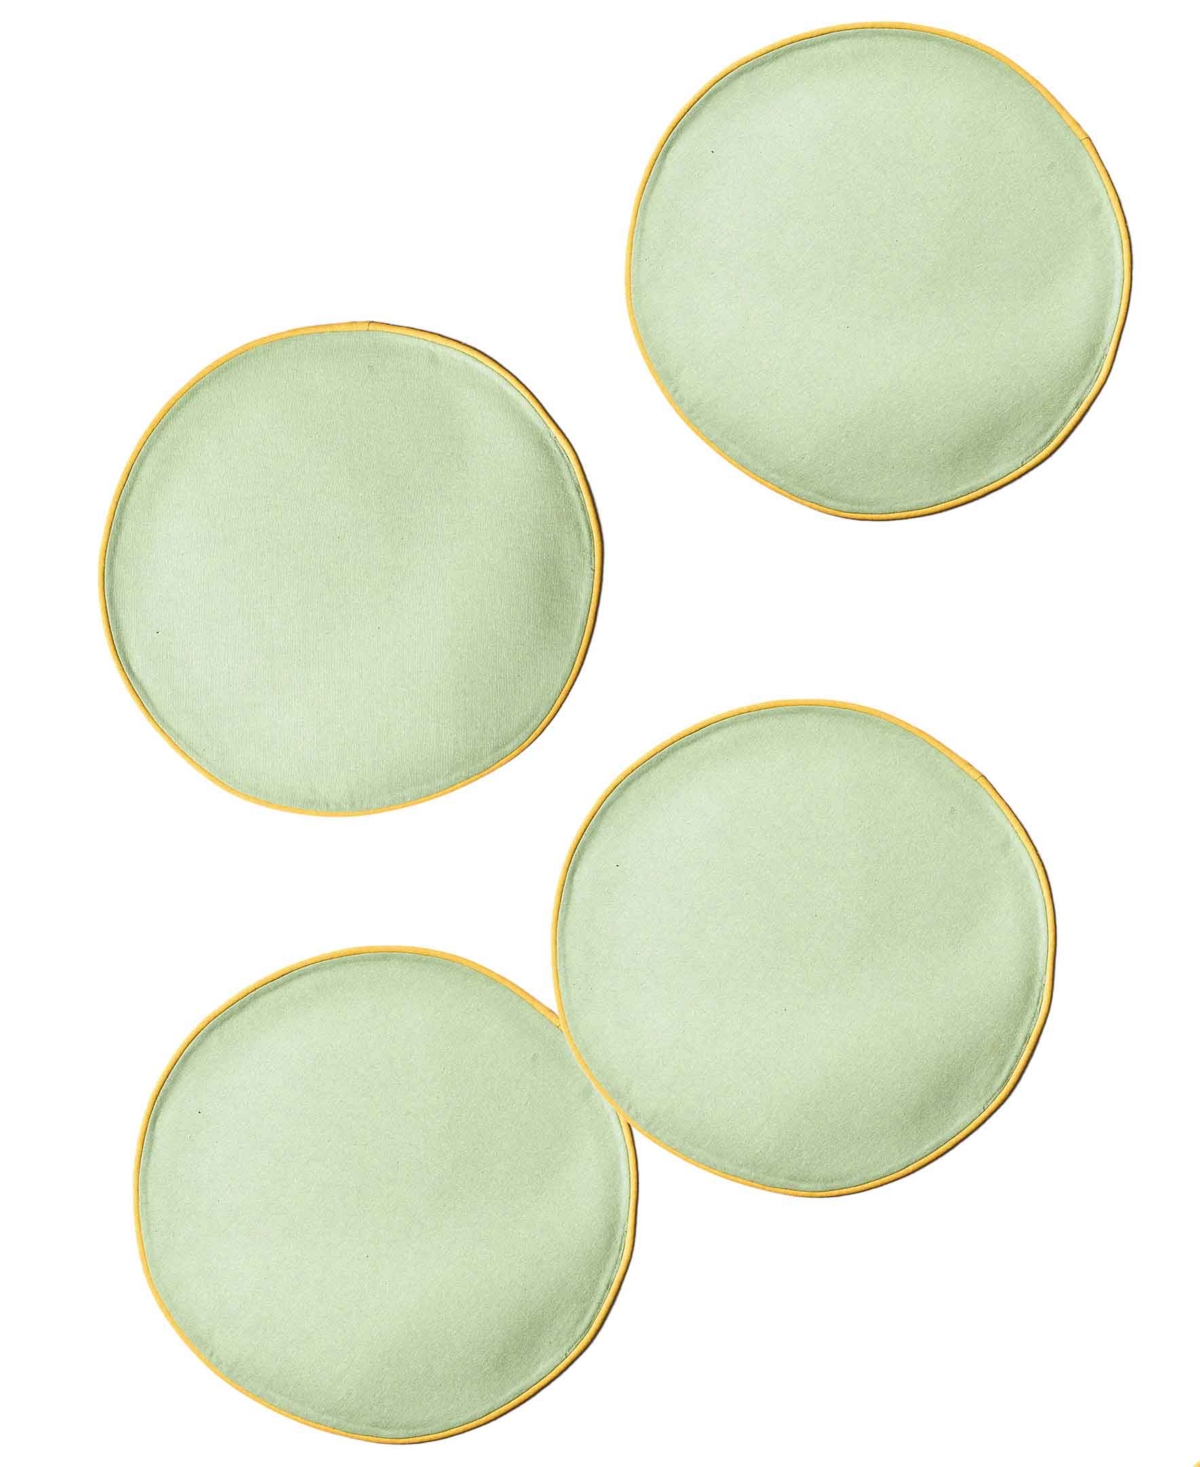 Coton Colors Block Round Placemat Set Of 4, Service For 4 In Safe